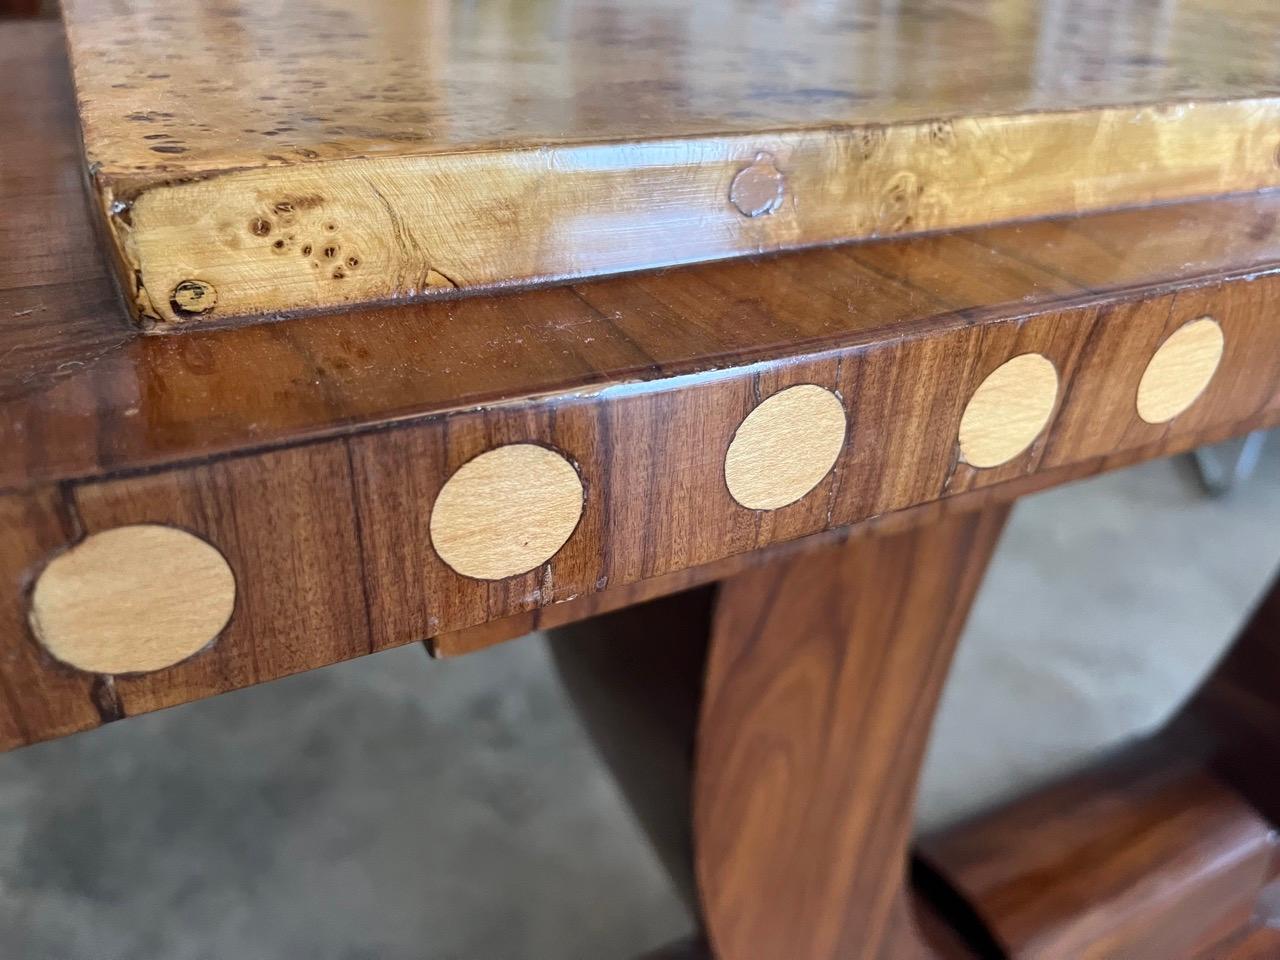 This piece is an exceptional Art Deco console with impressive burl top and circular inlay details around the perimeter.  The wood is also highly lacquered which gives the console a lovely sheen.  Dimensions of the console are 49